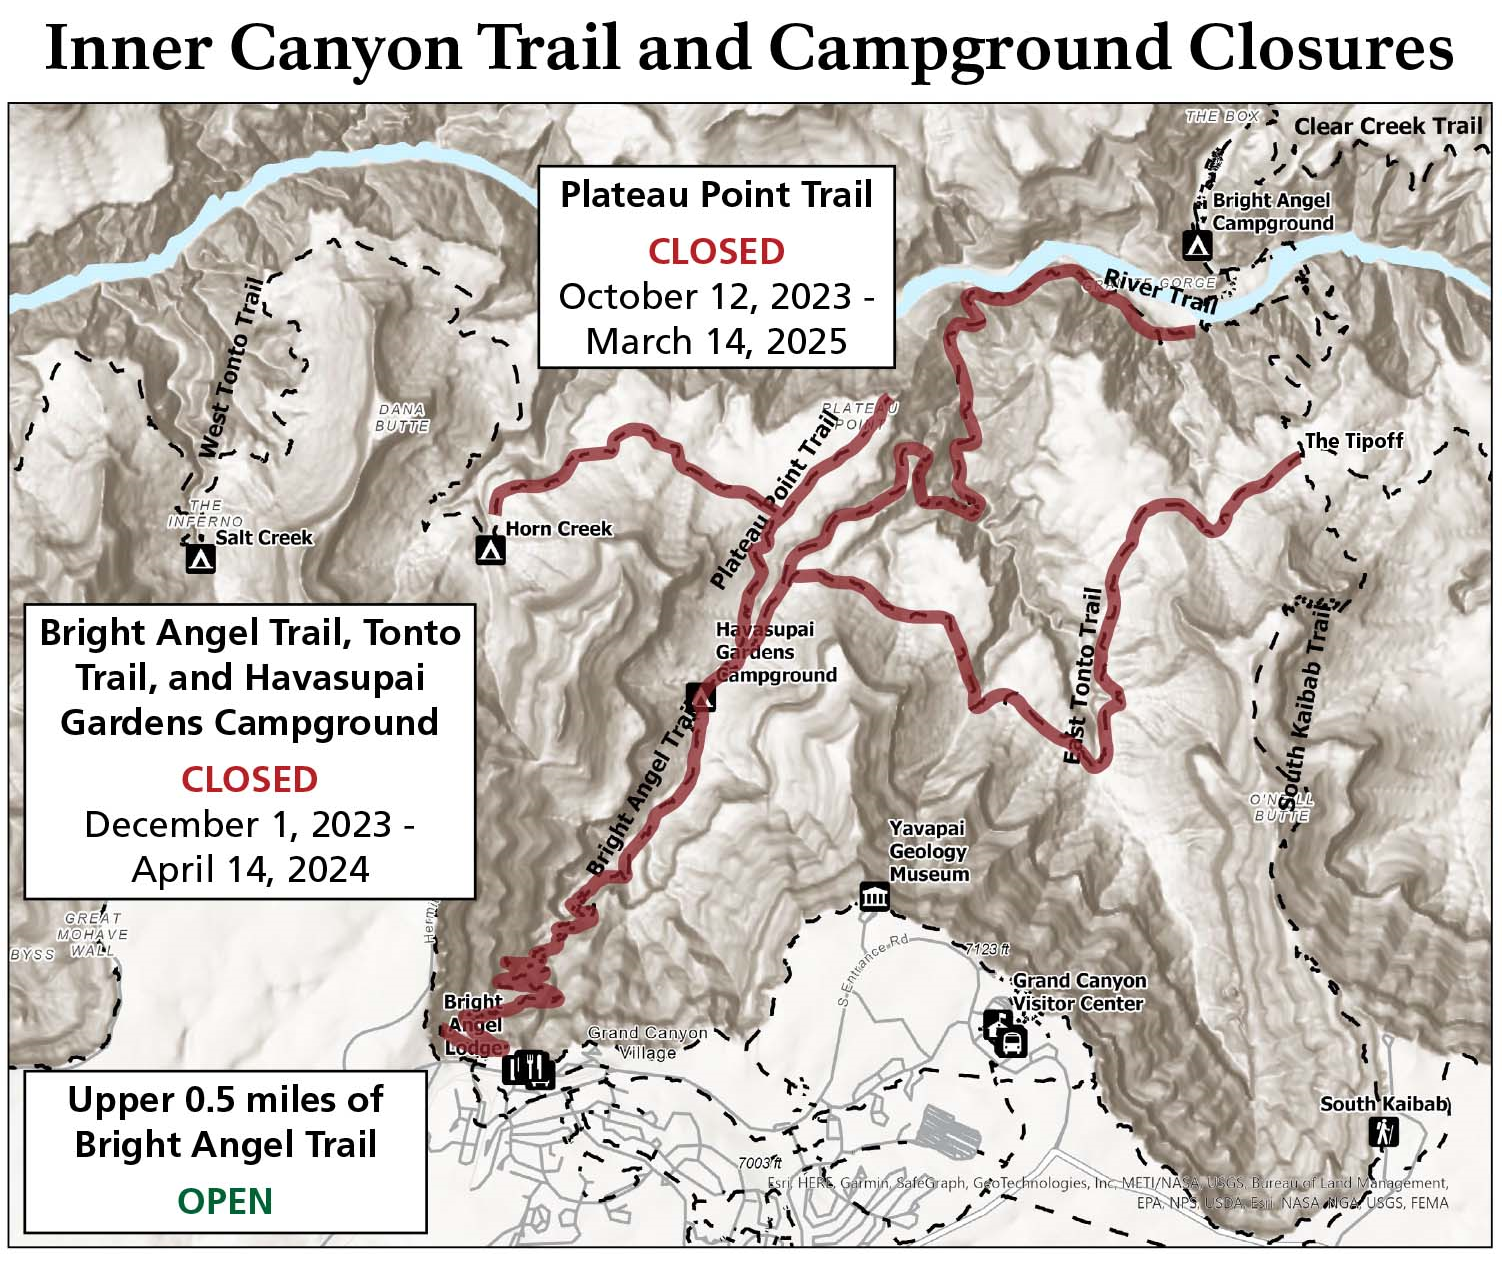 Grand Canyon National Park Operations Update